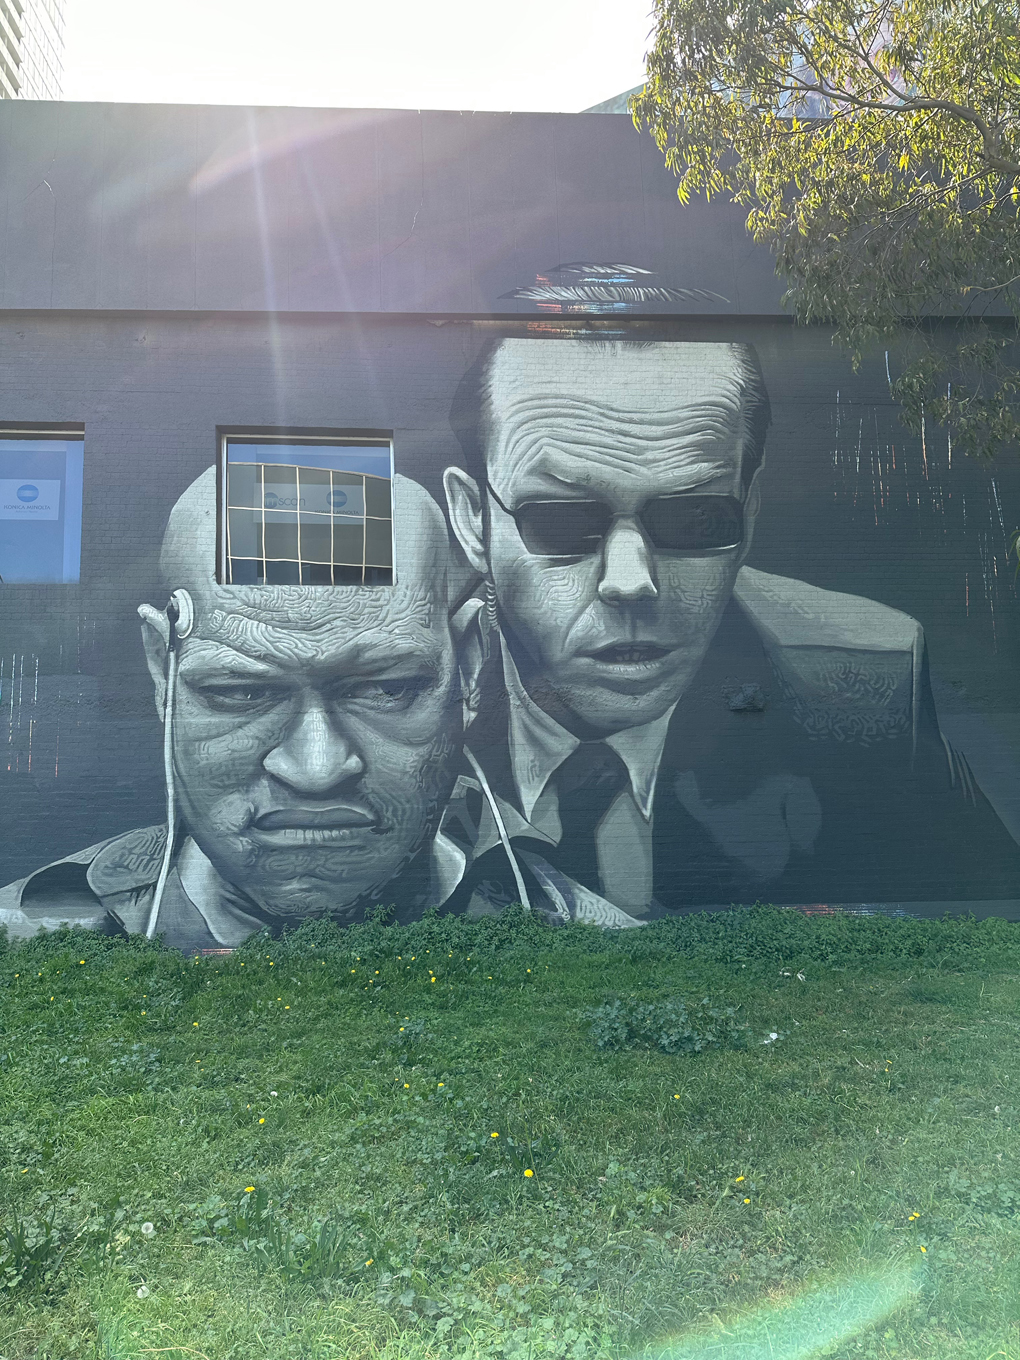 Street art mural depicting Morpheus and Agent Smith in The Matrix during the interrogation scene